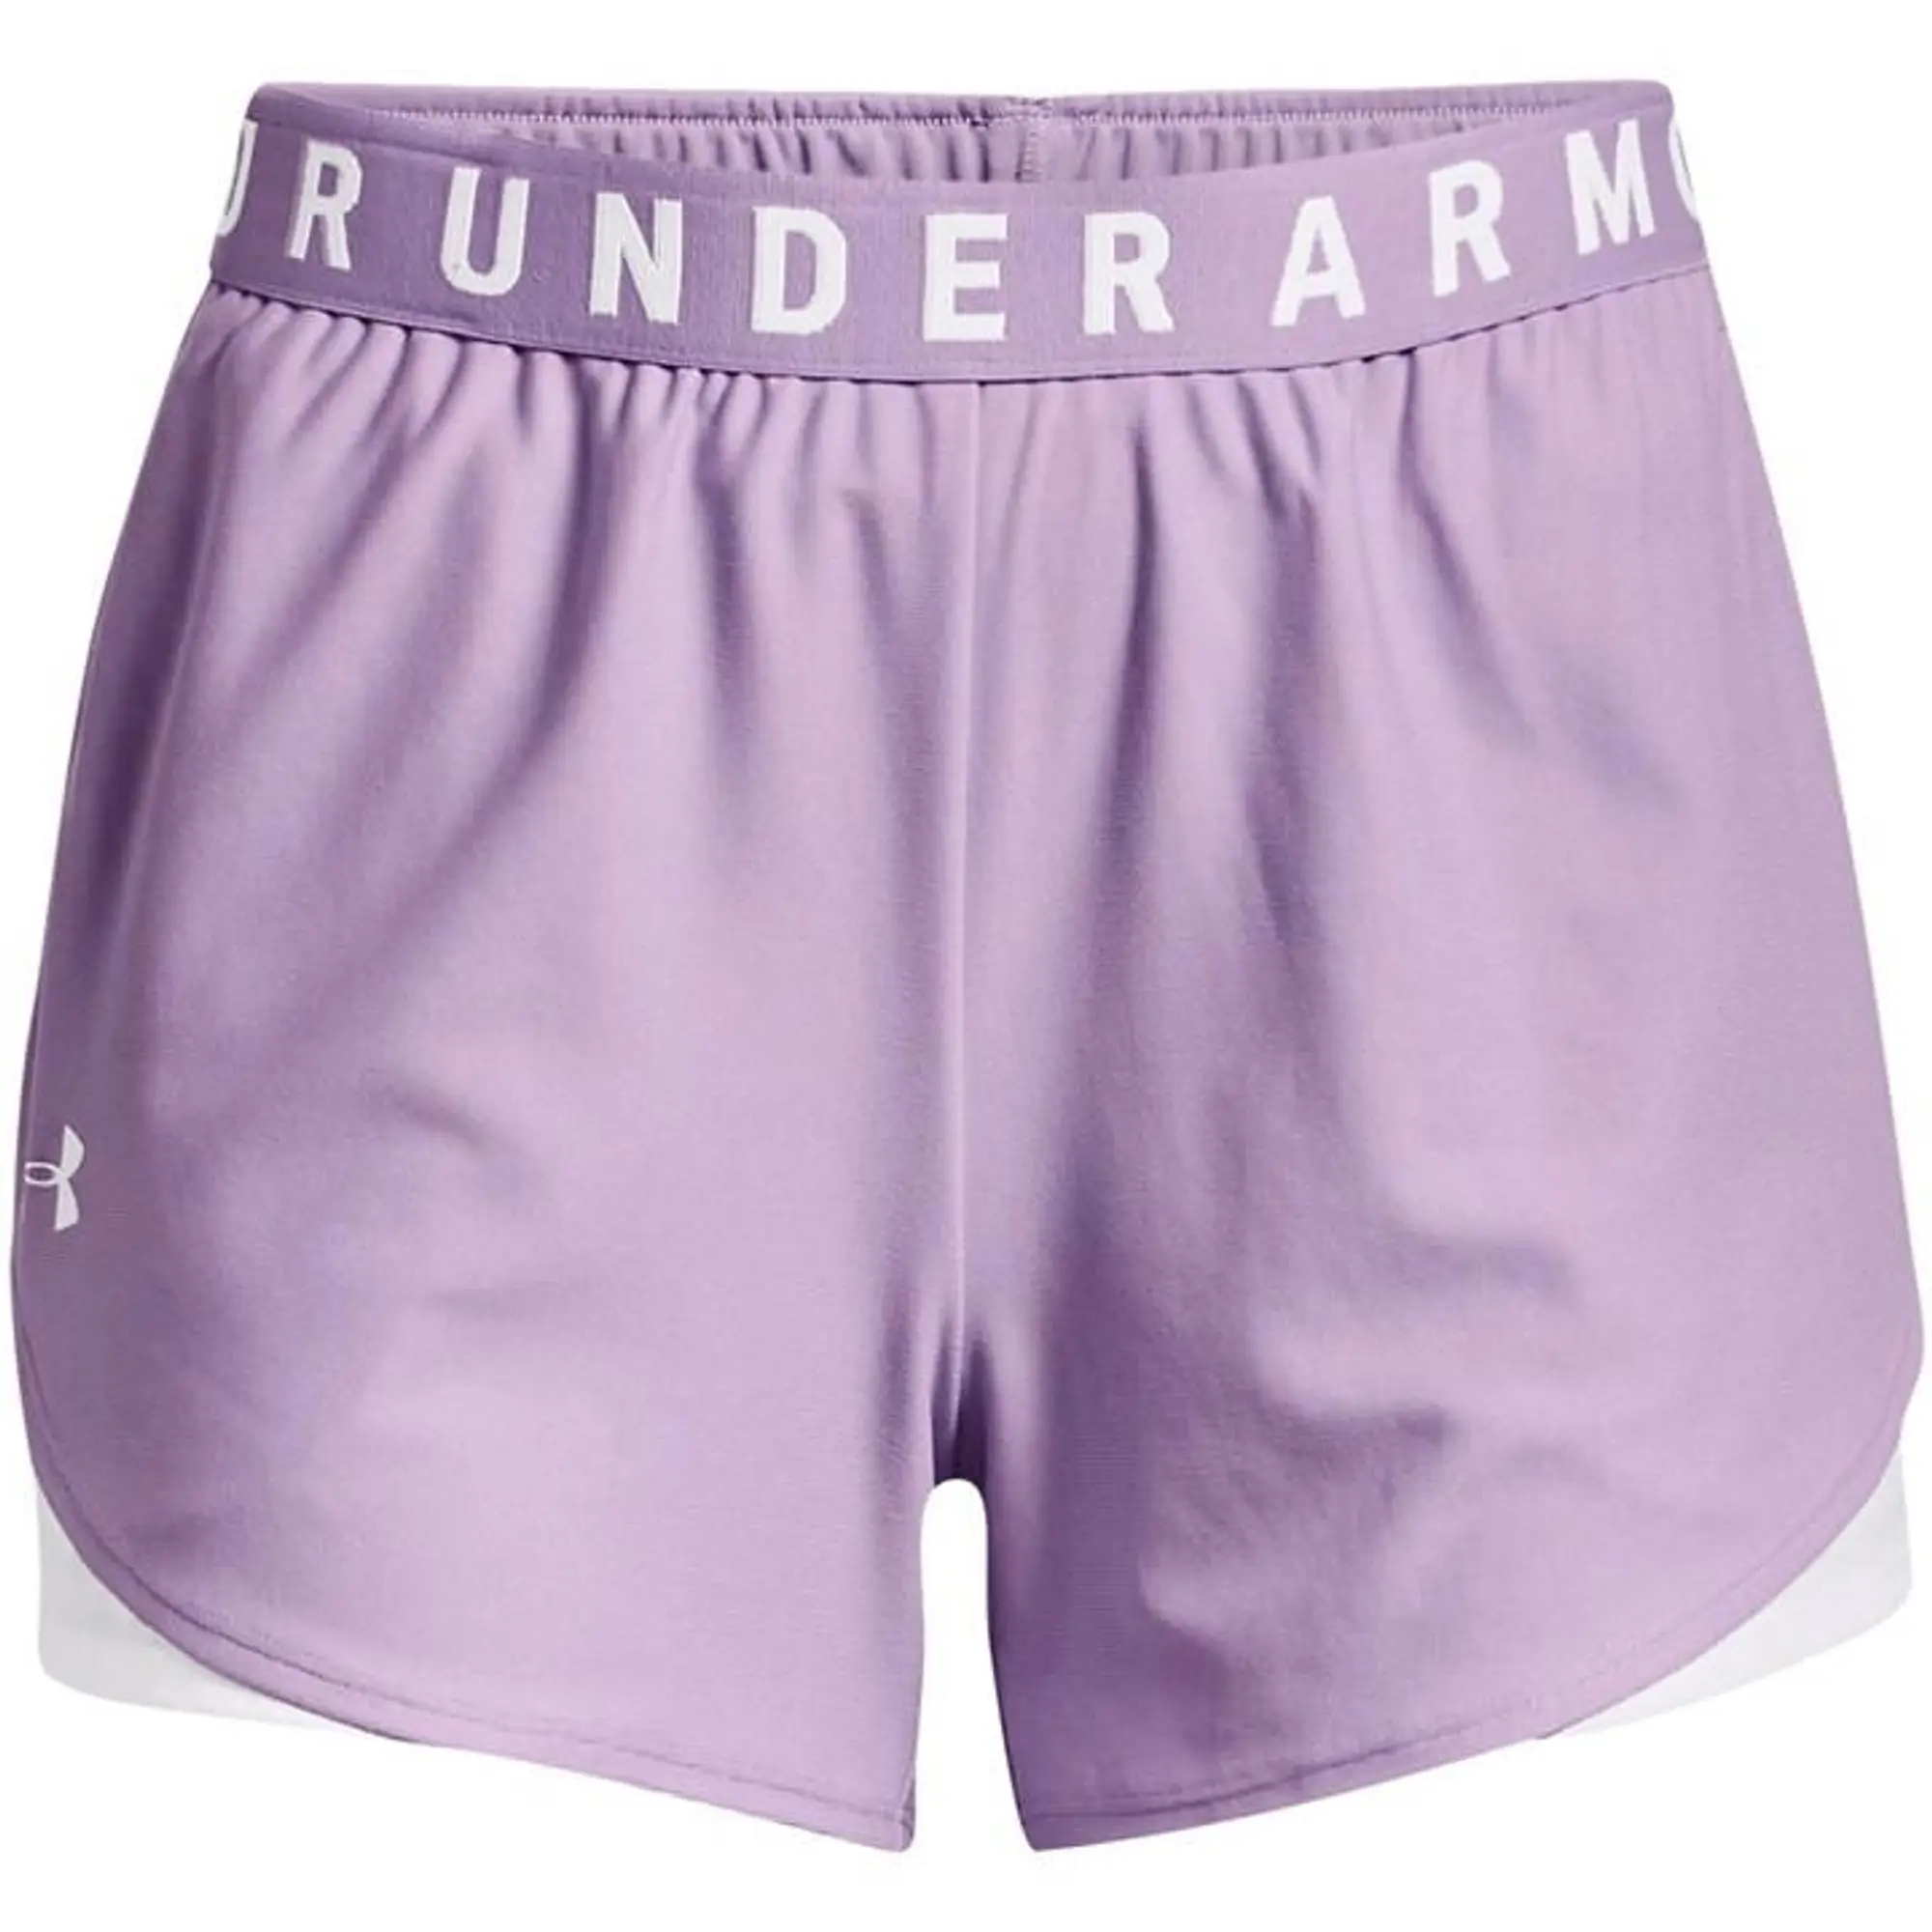 Under Armour Play Up 2 Shorts Ladies - Grey